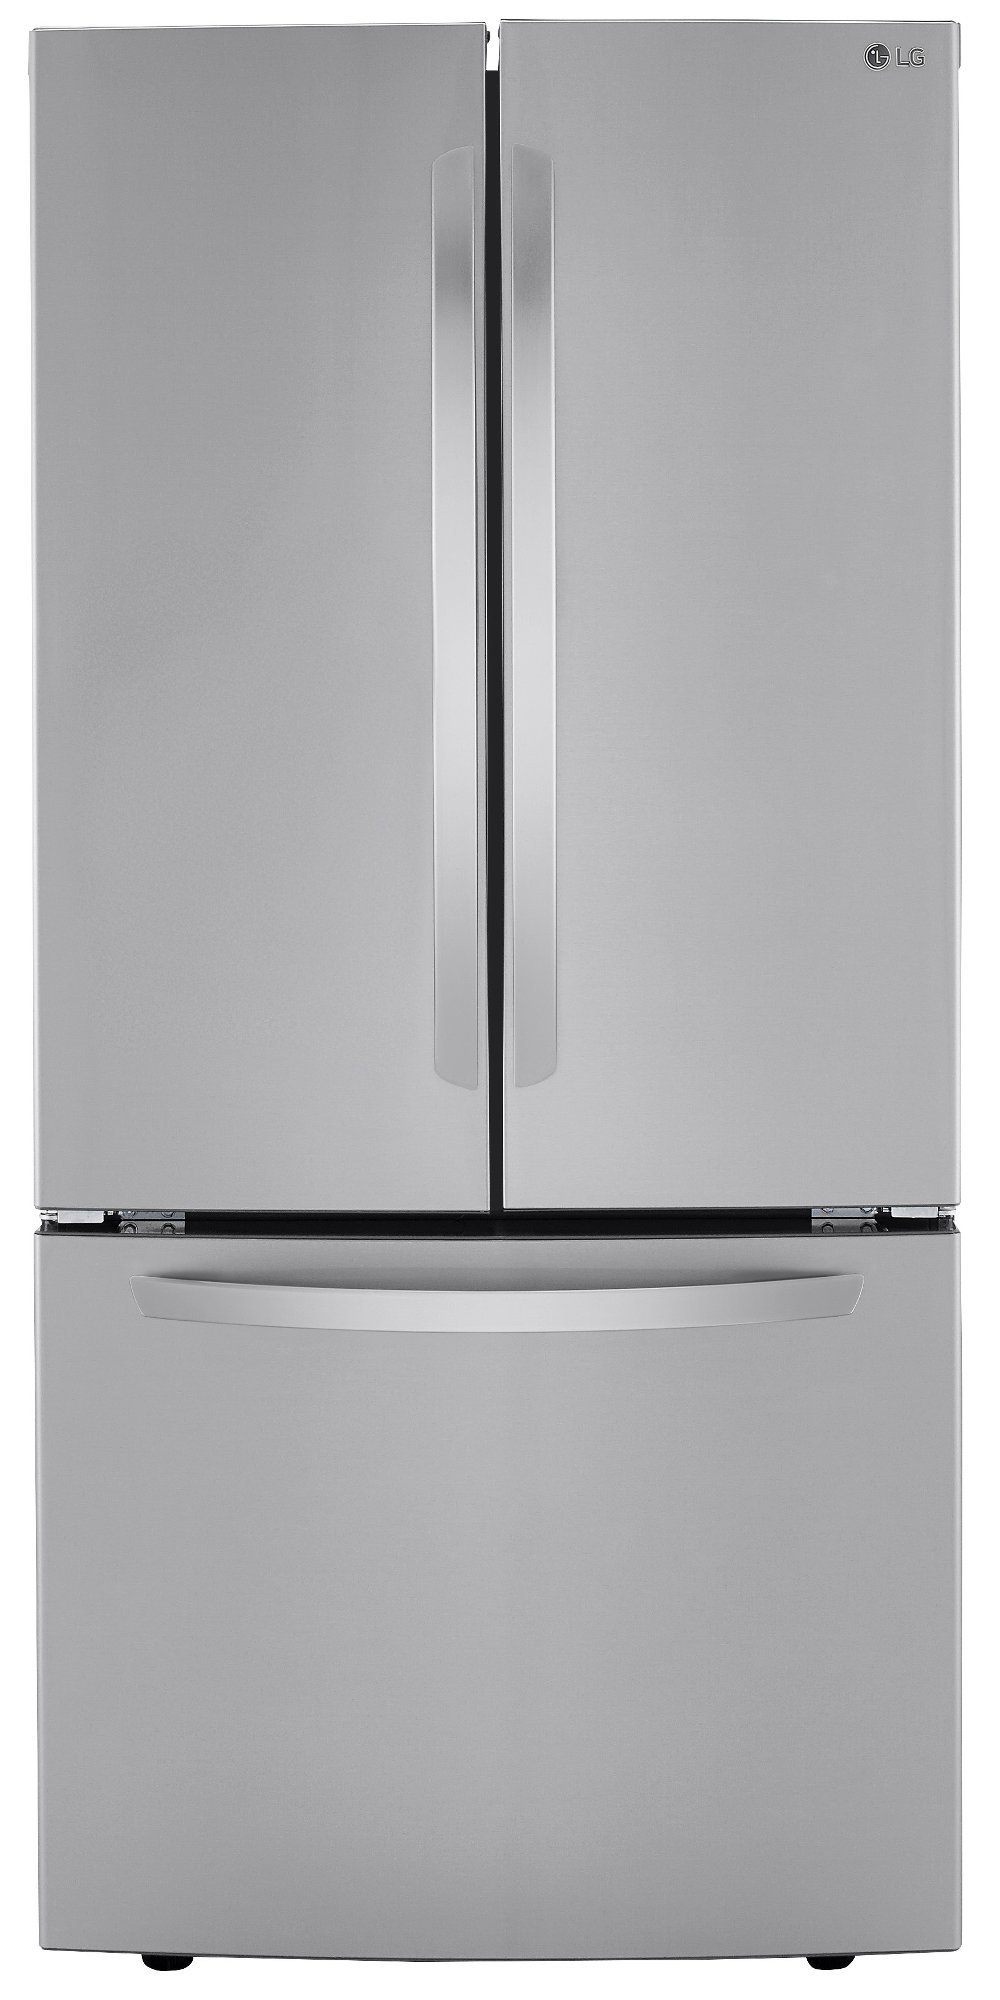 Stainless steel LG french door refrigerator